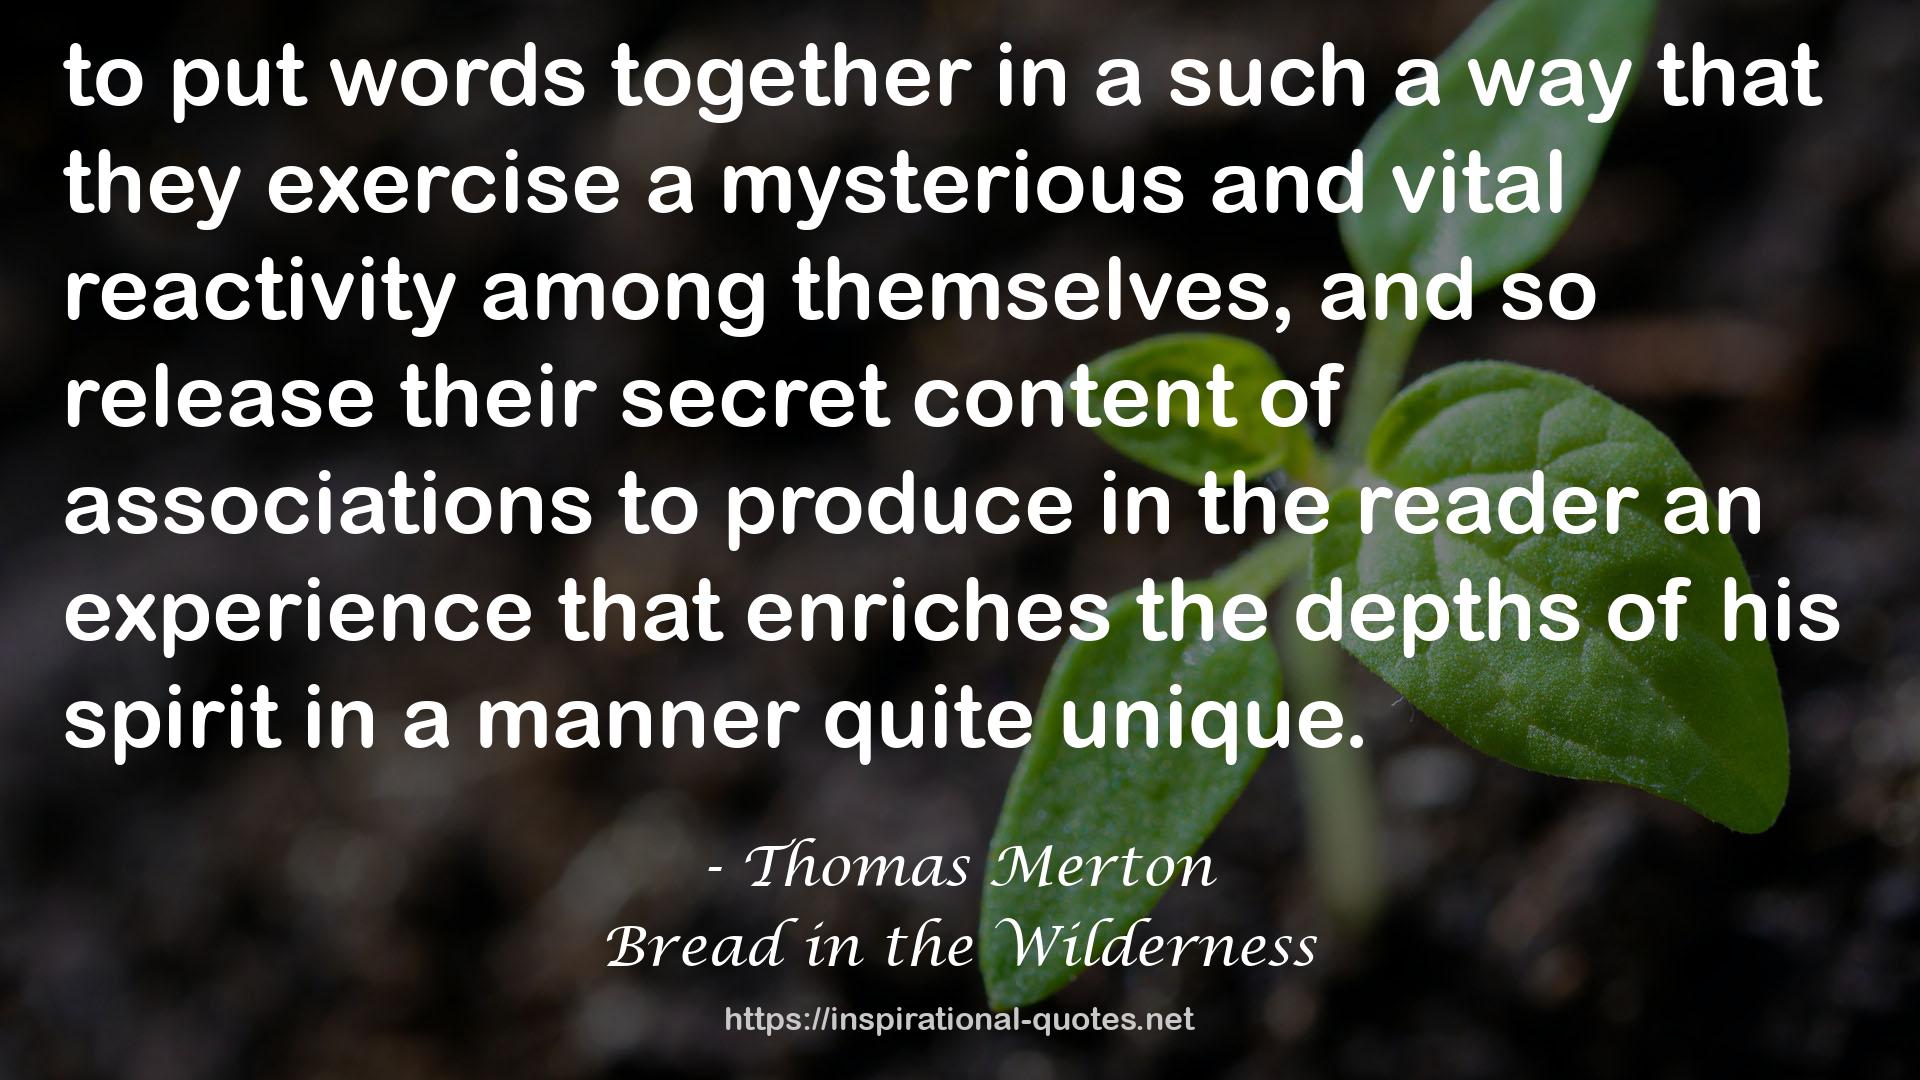 Bread in the Wilderness QUOTES